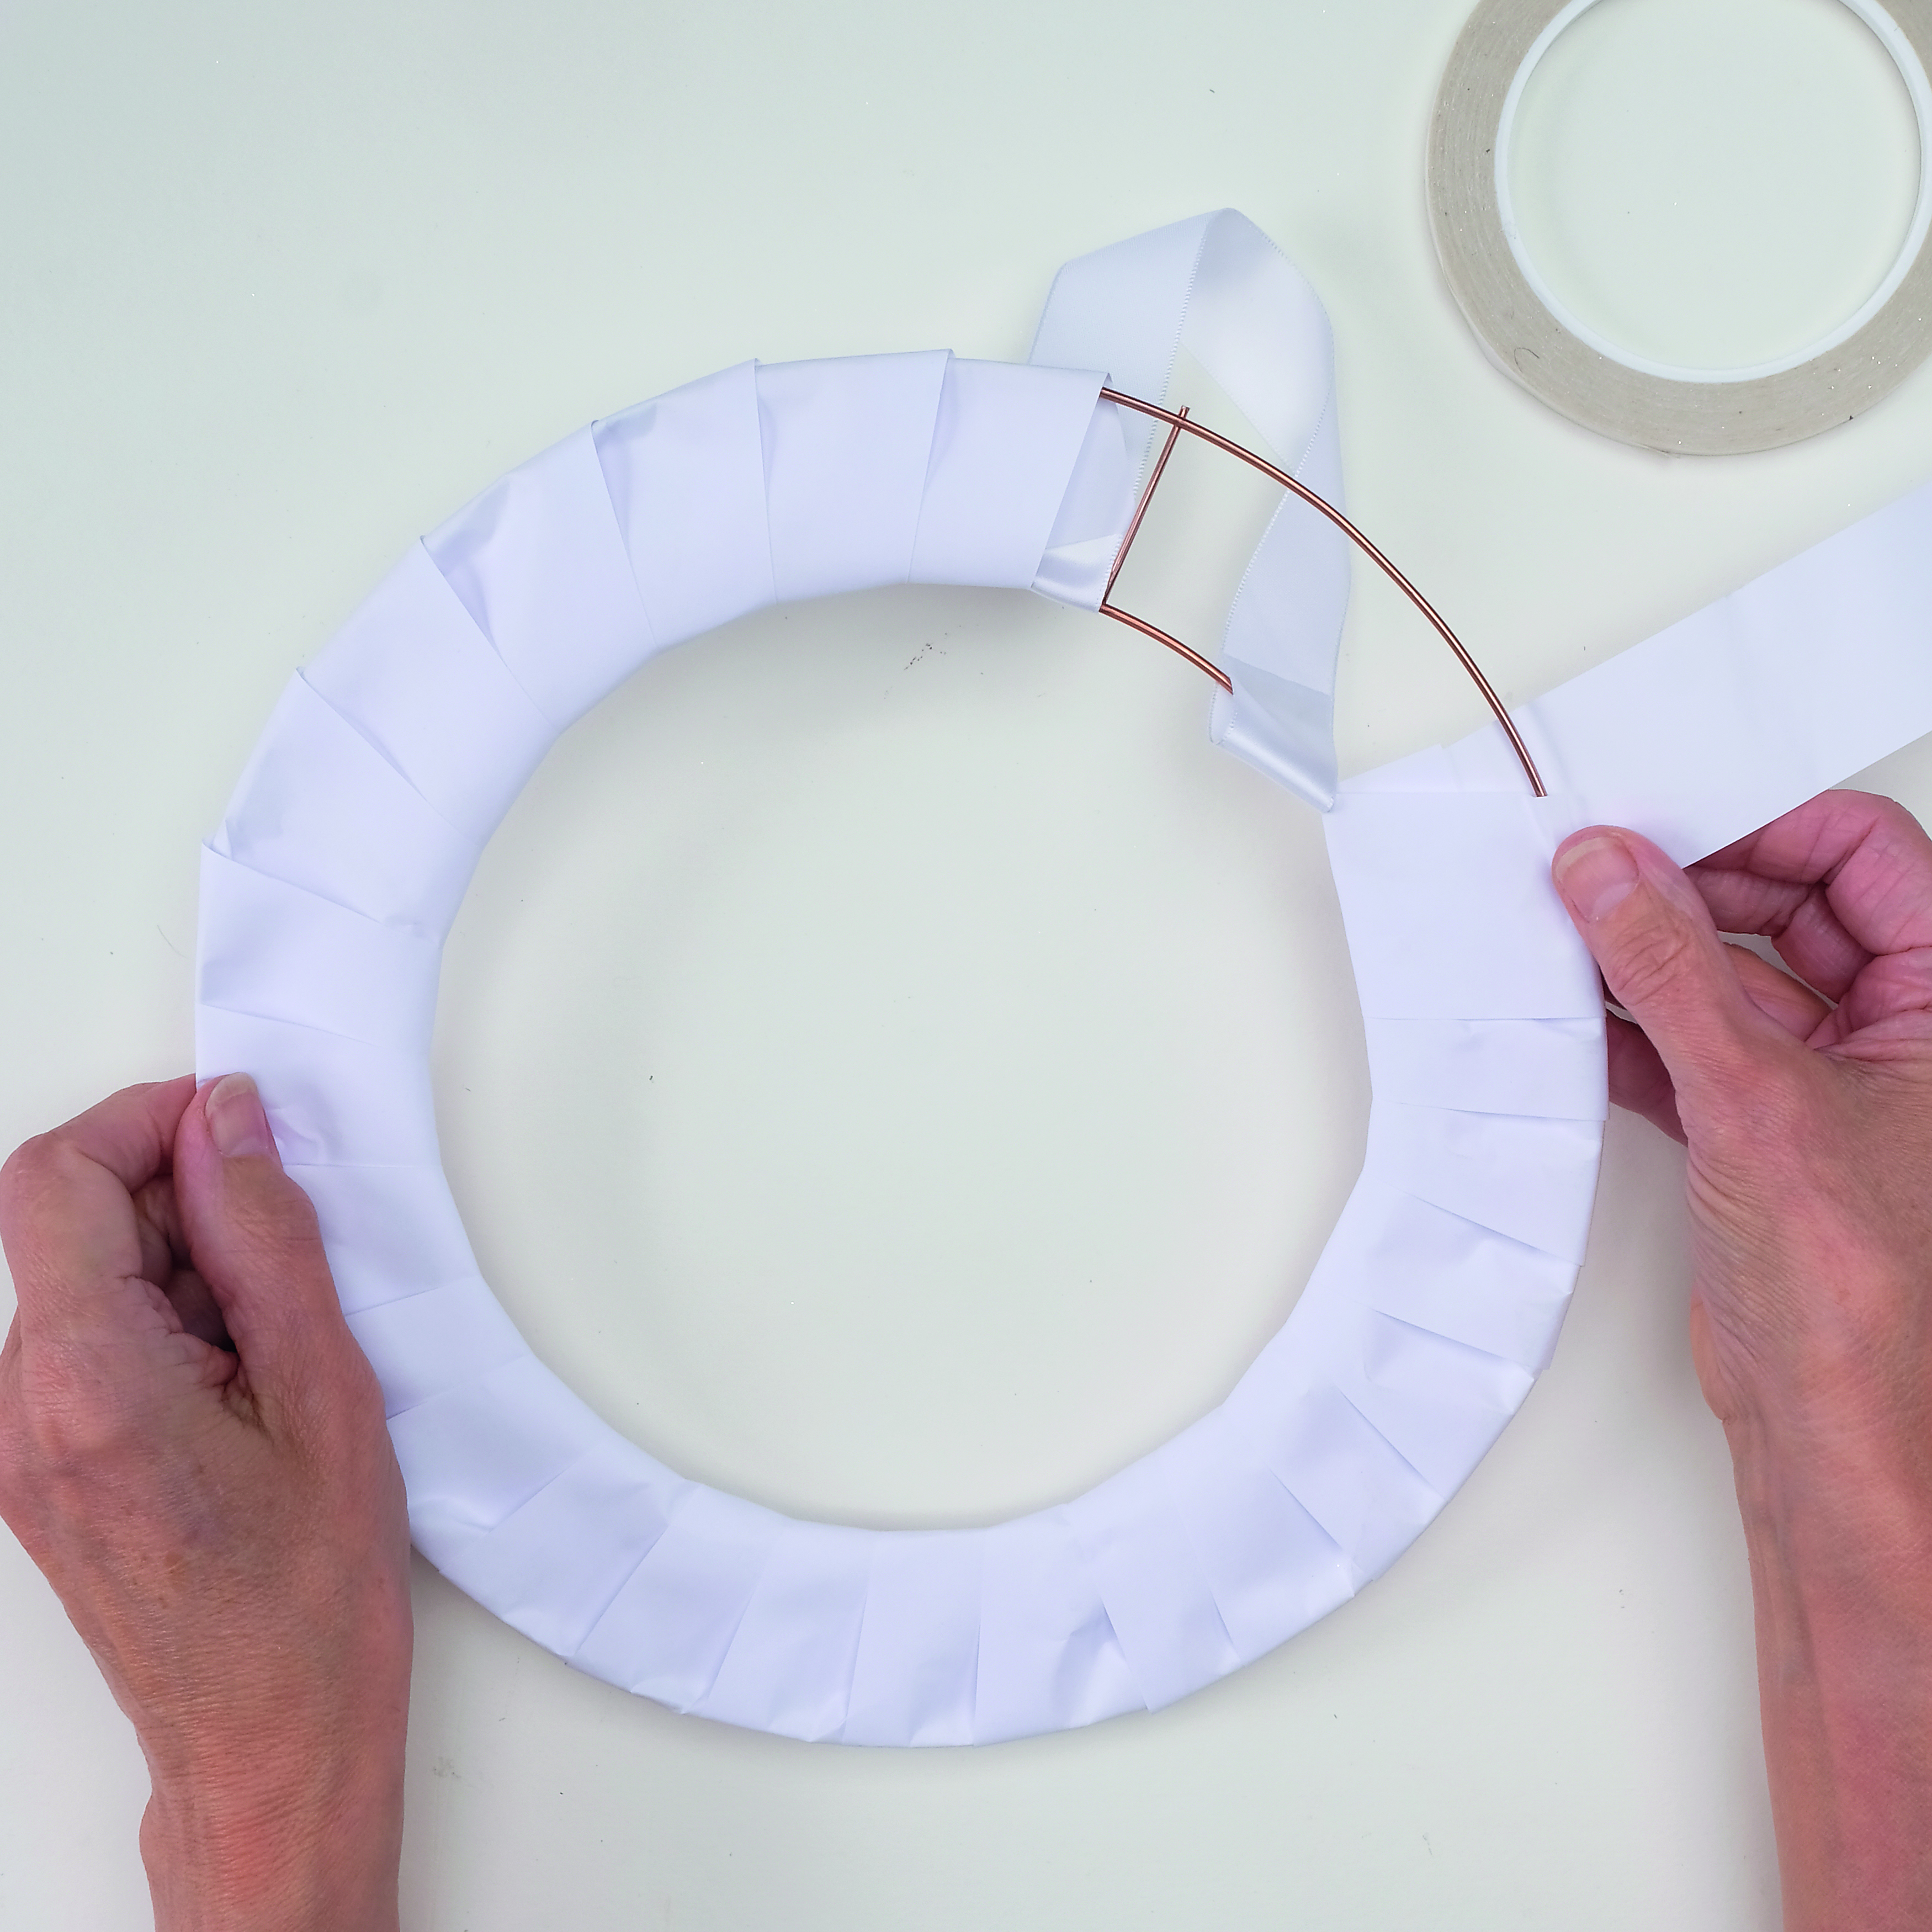 How to make an origami wreath – step 1